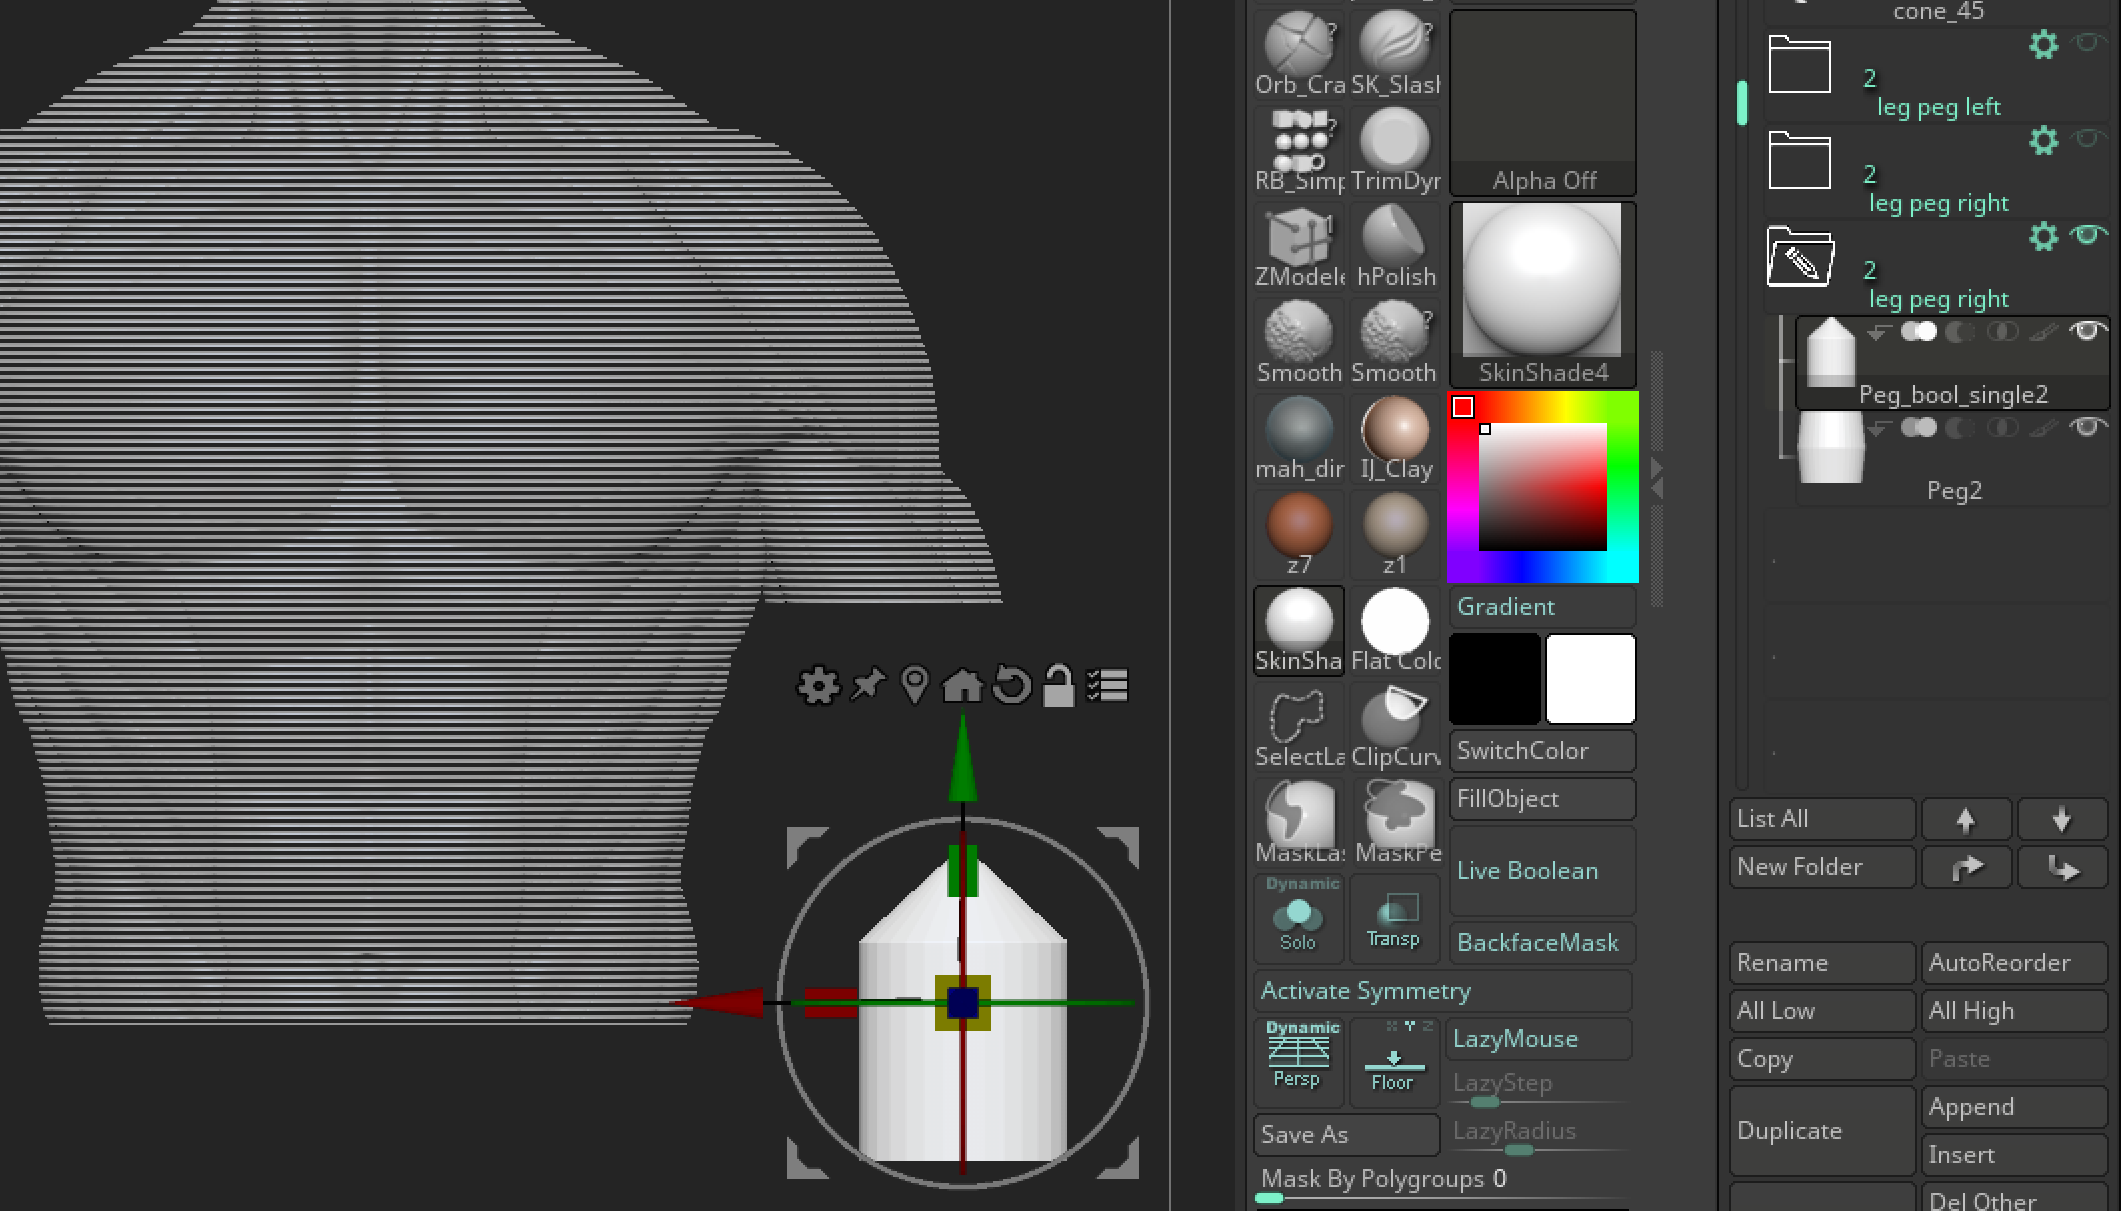 red axis mean zbrush